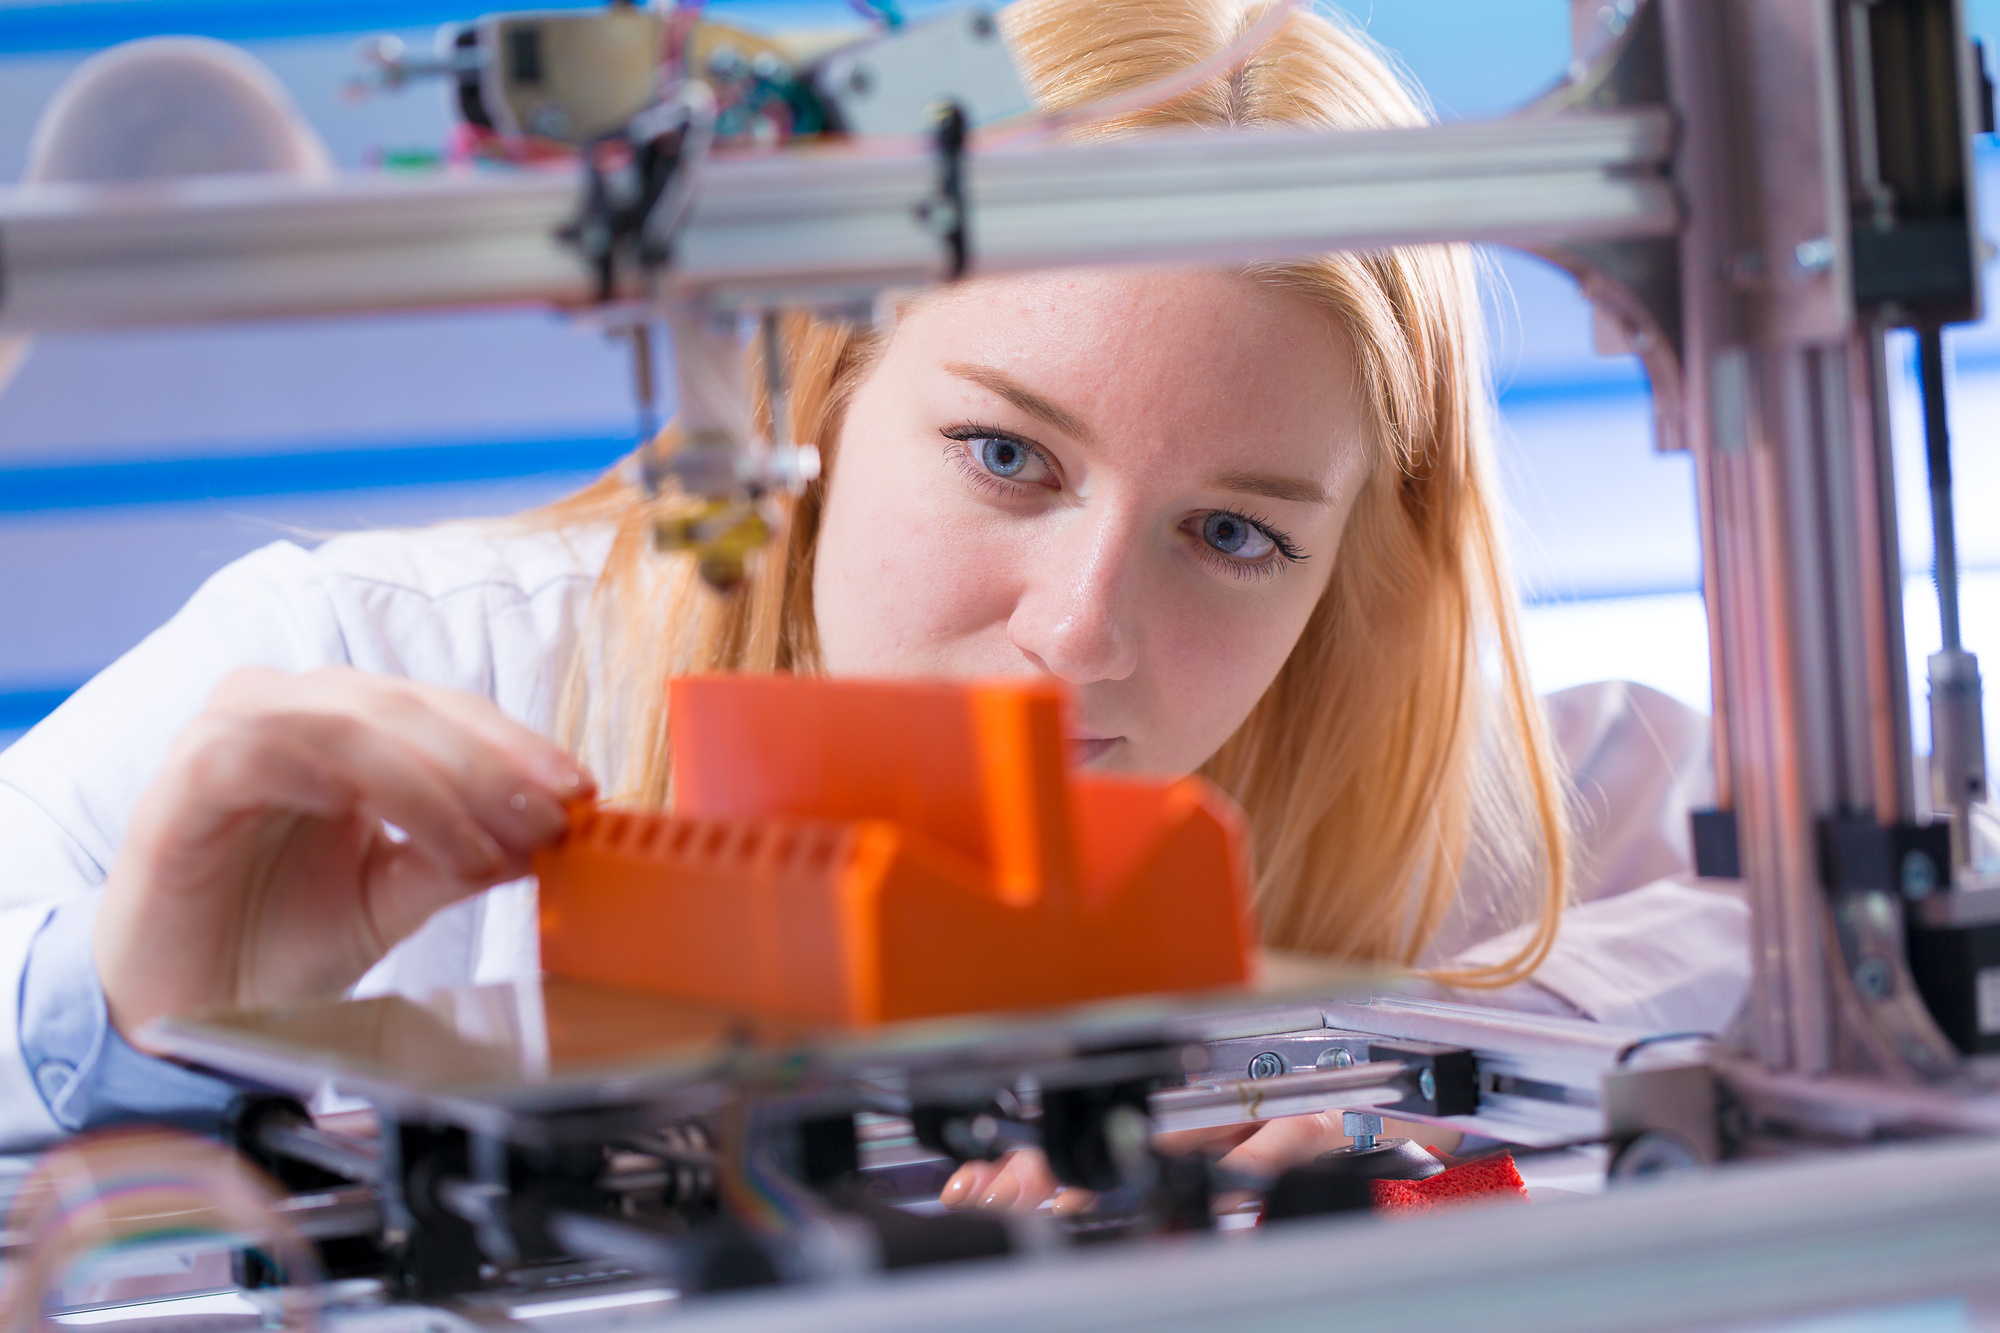 The 3D Printing Advances That Will Affect Consumers in 2020 - LoaD Image 2019 12 05T101717.206